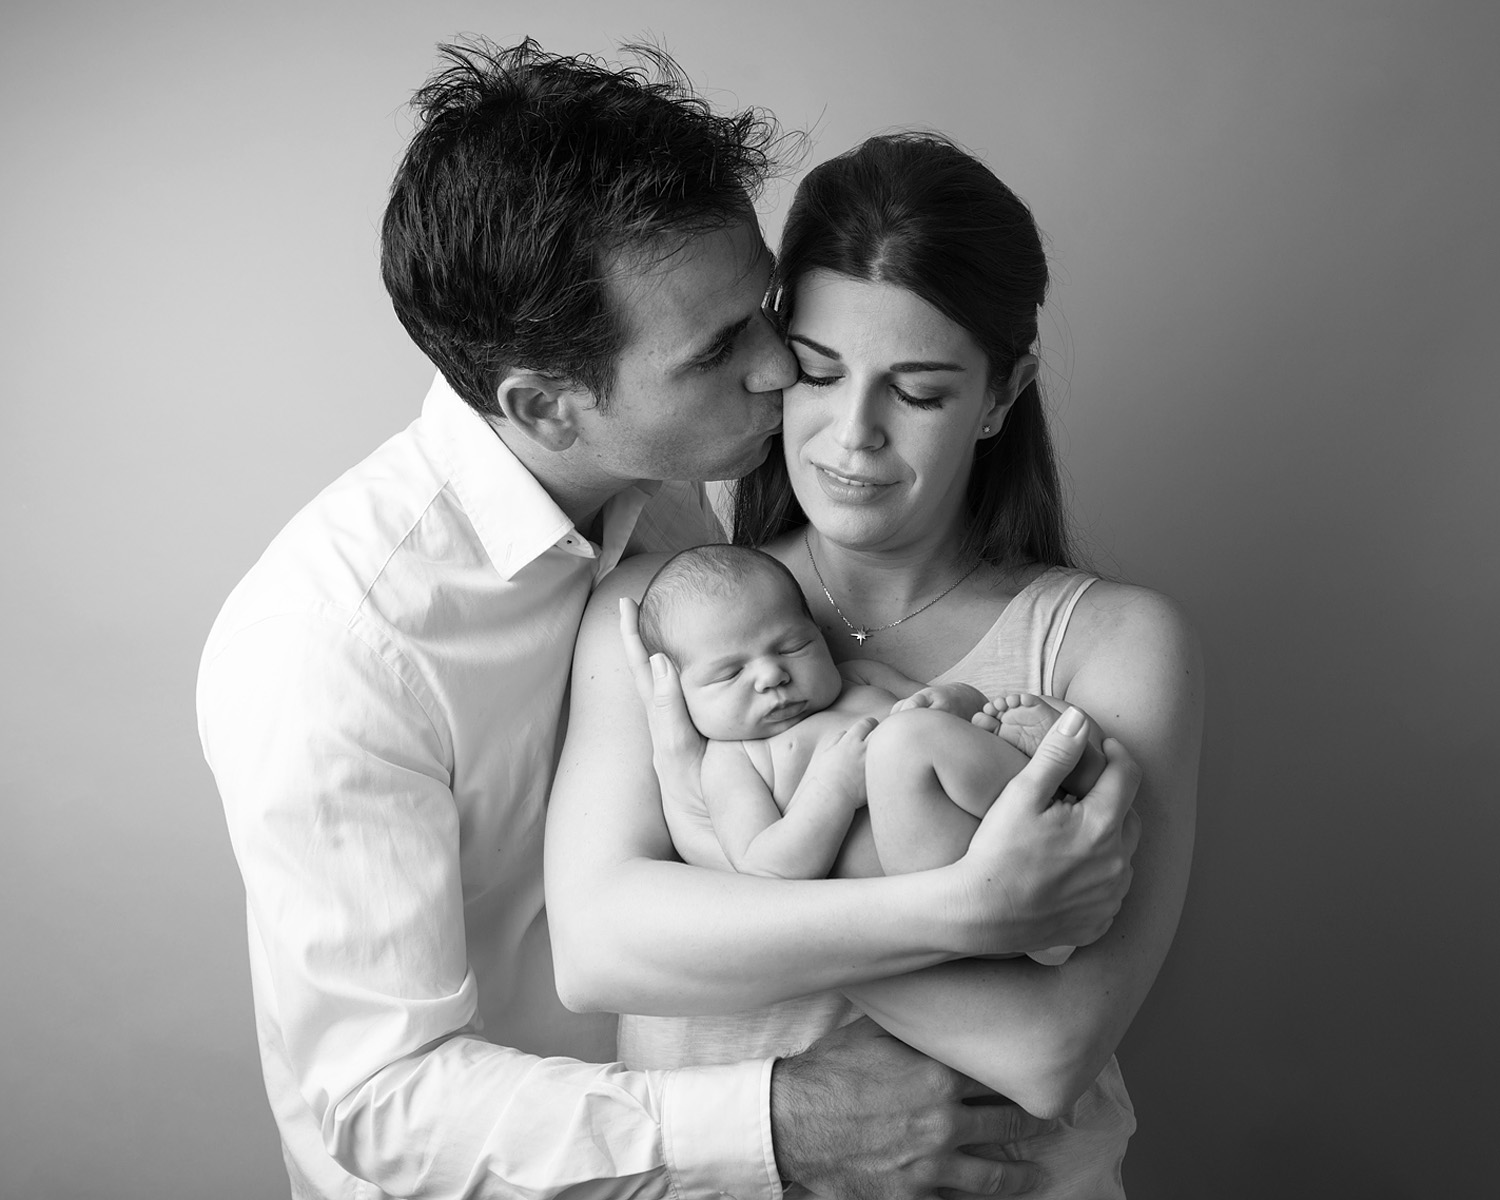 A doting father embraces his wife as she holds his baby girl